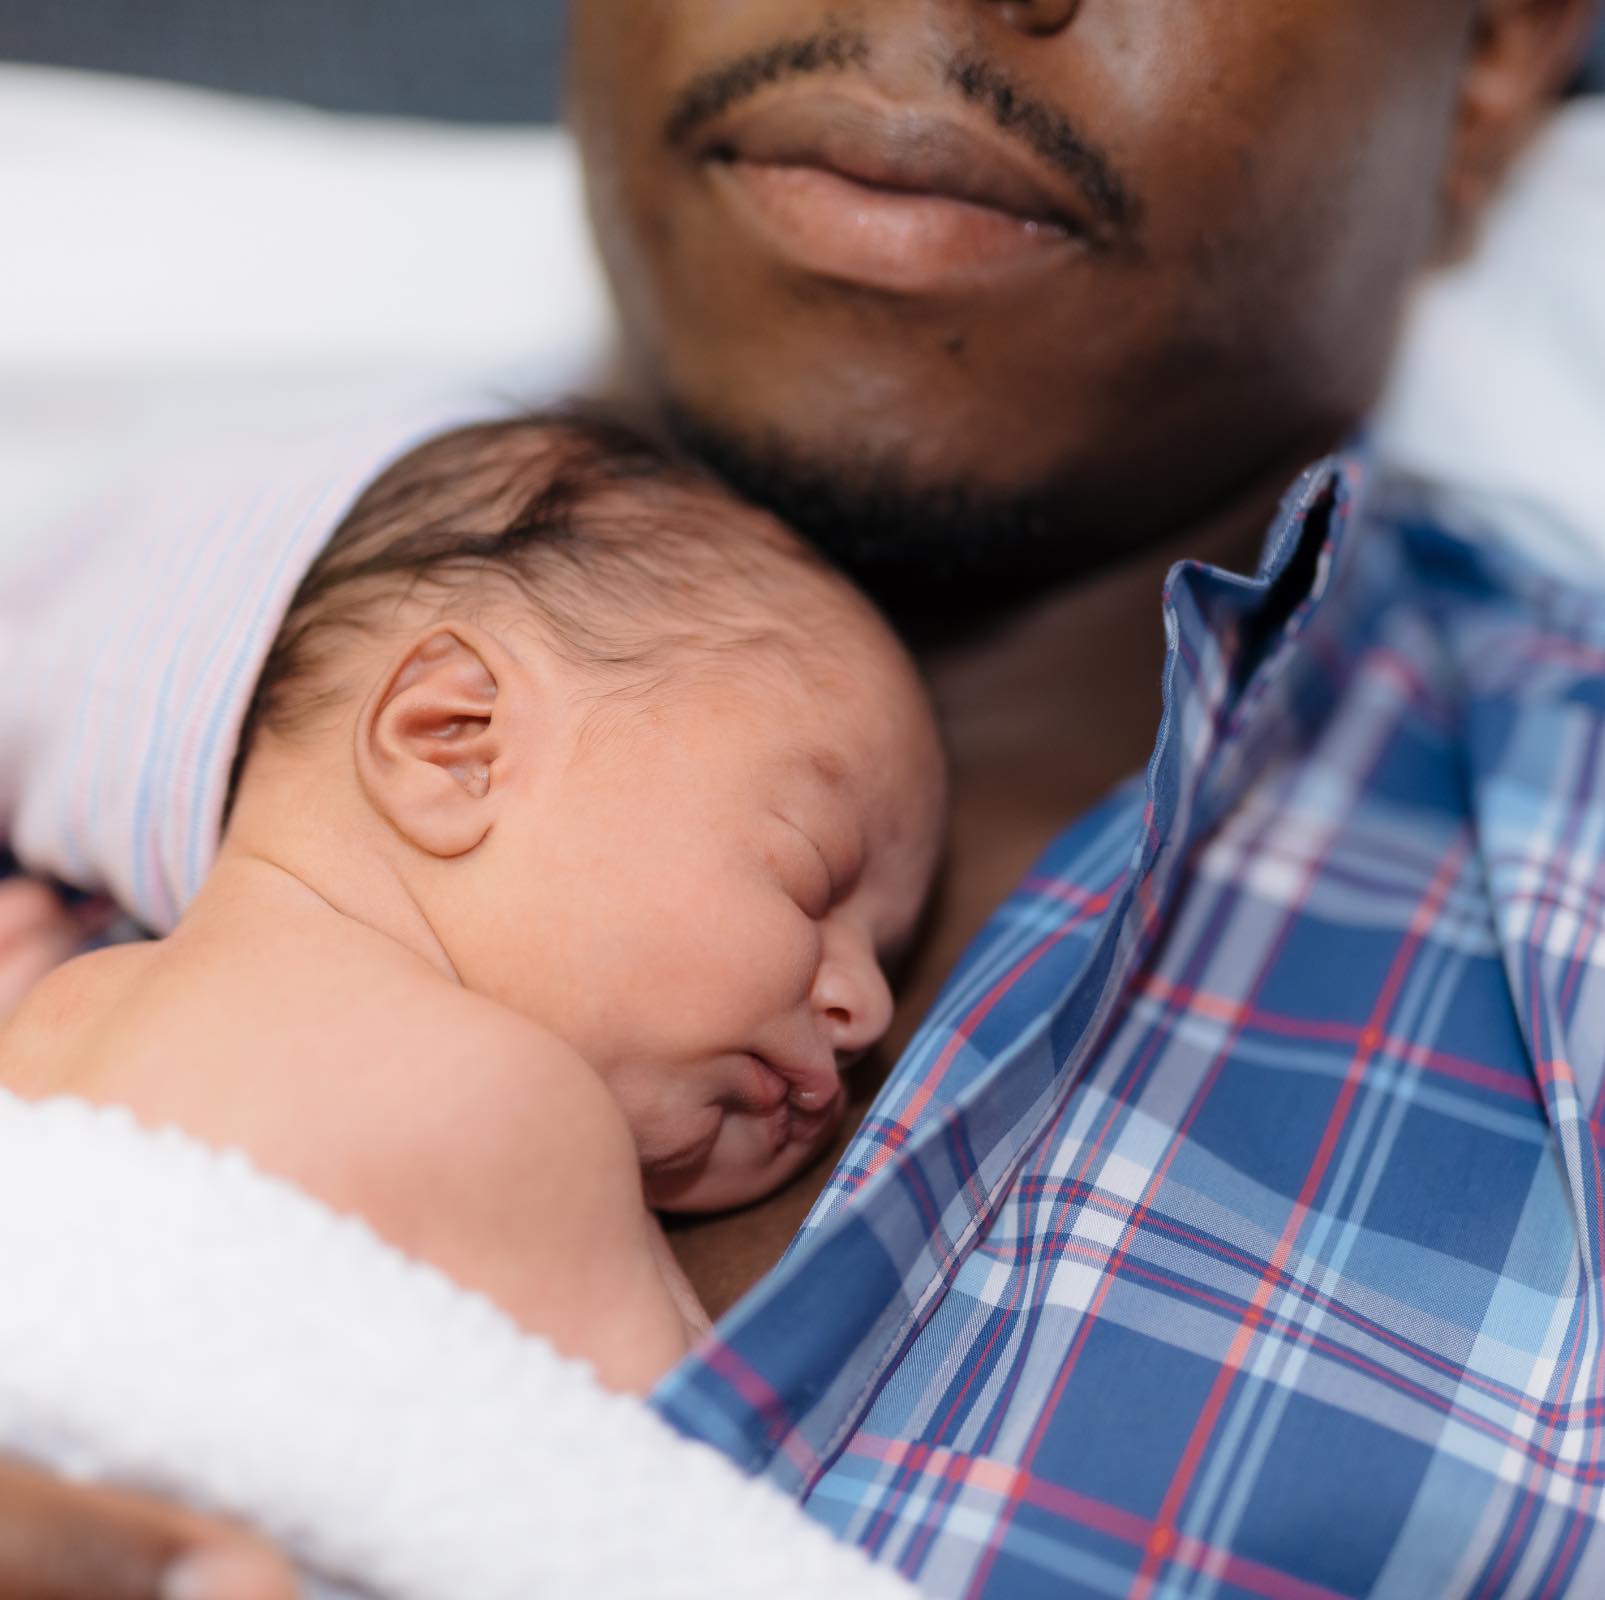 This dad with a newborn baby could appreciate the gift of house cleaning with Zerorez to ease the transition.